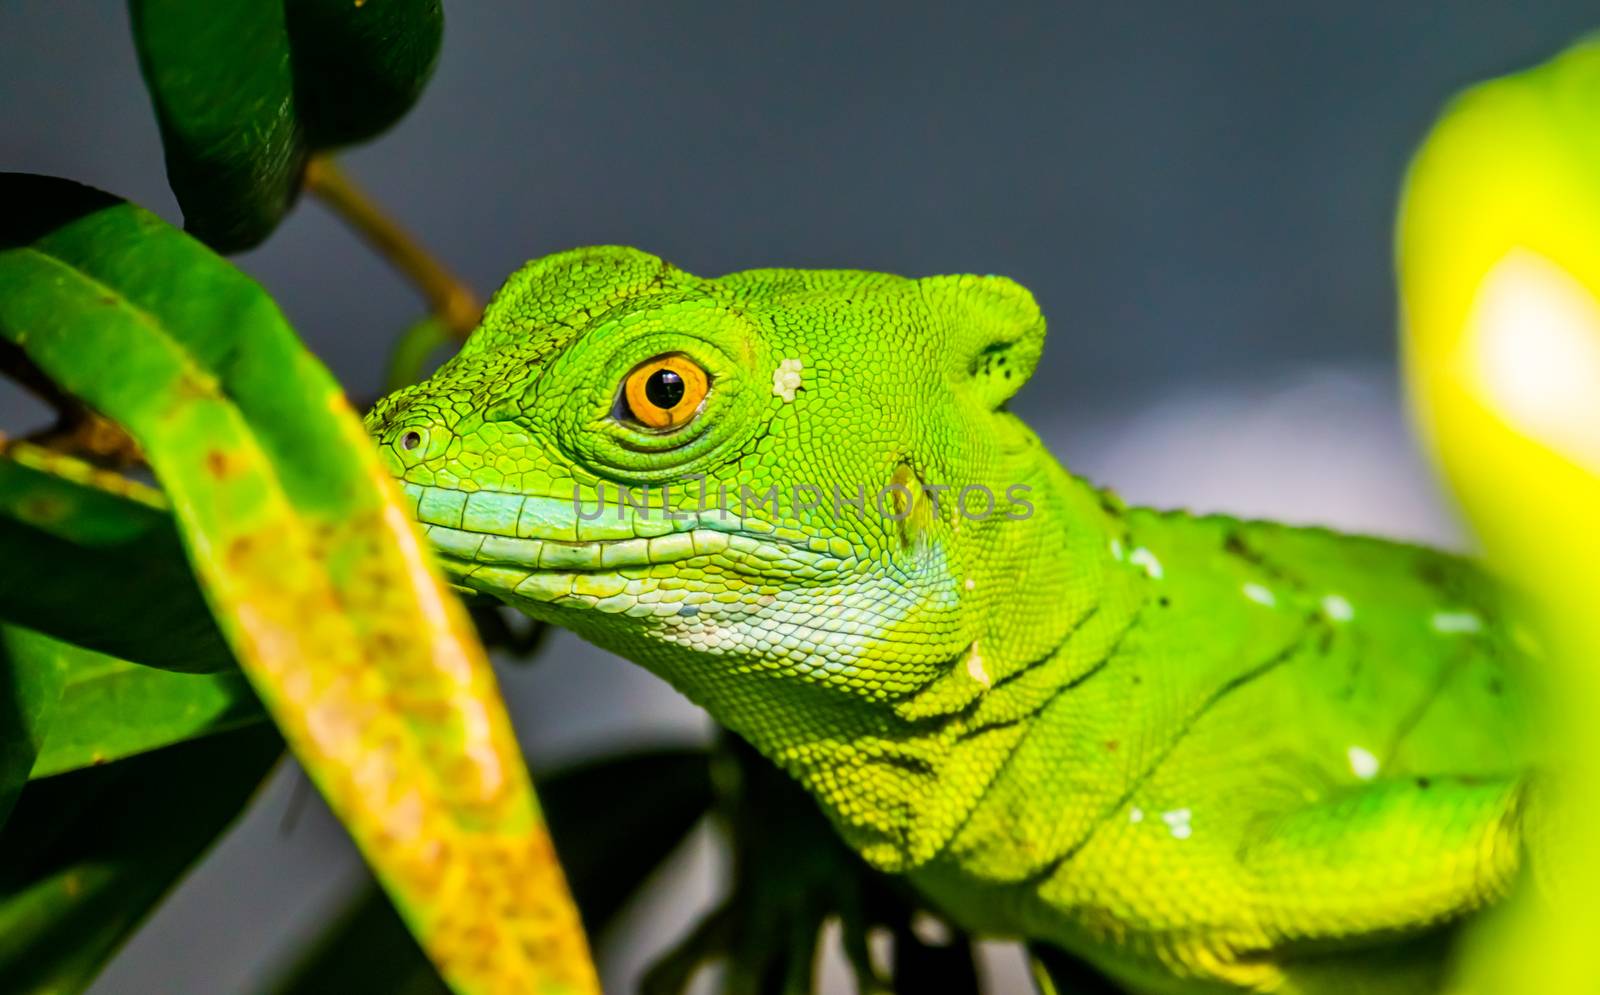 closeup of the face of a green plumed basilisk, tropical reptile specie from America by charlottebleijenberg